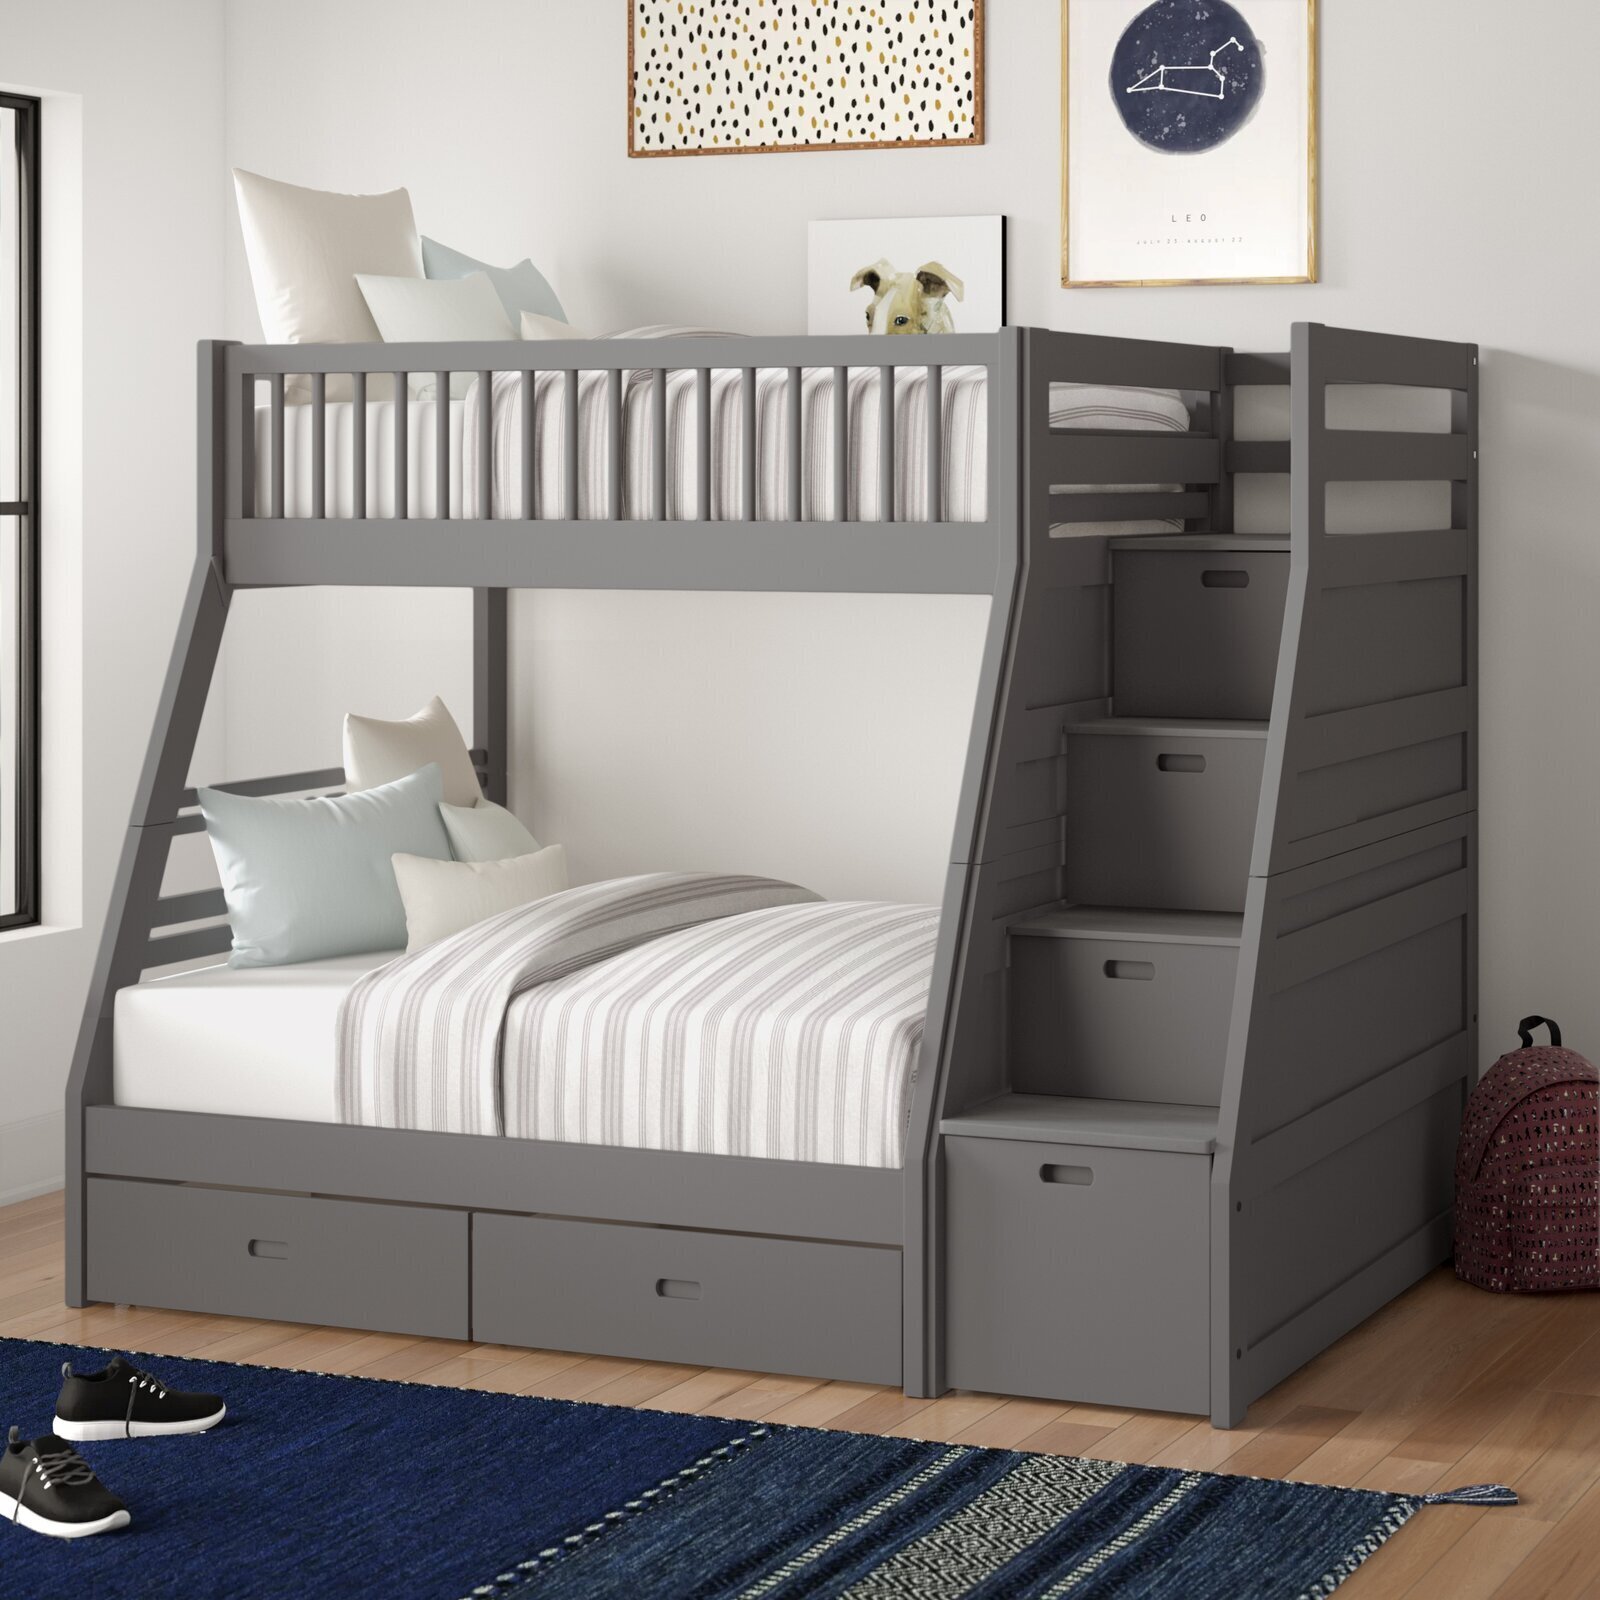 Shaker Style Bed with Drawers